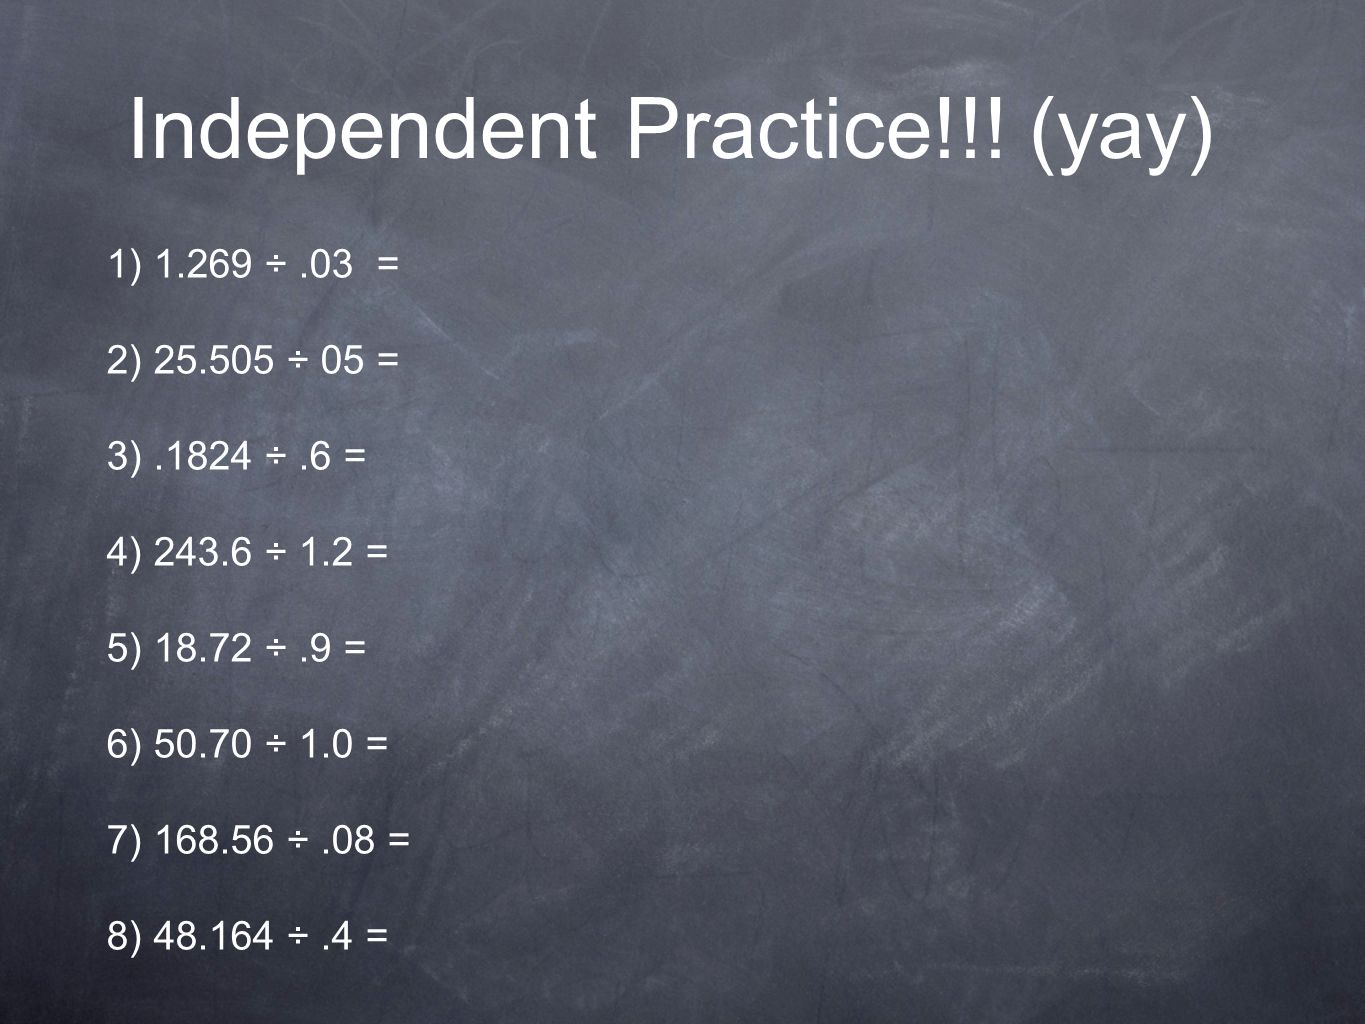 Independent Practice!!! (yay)